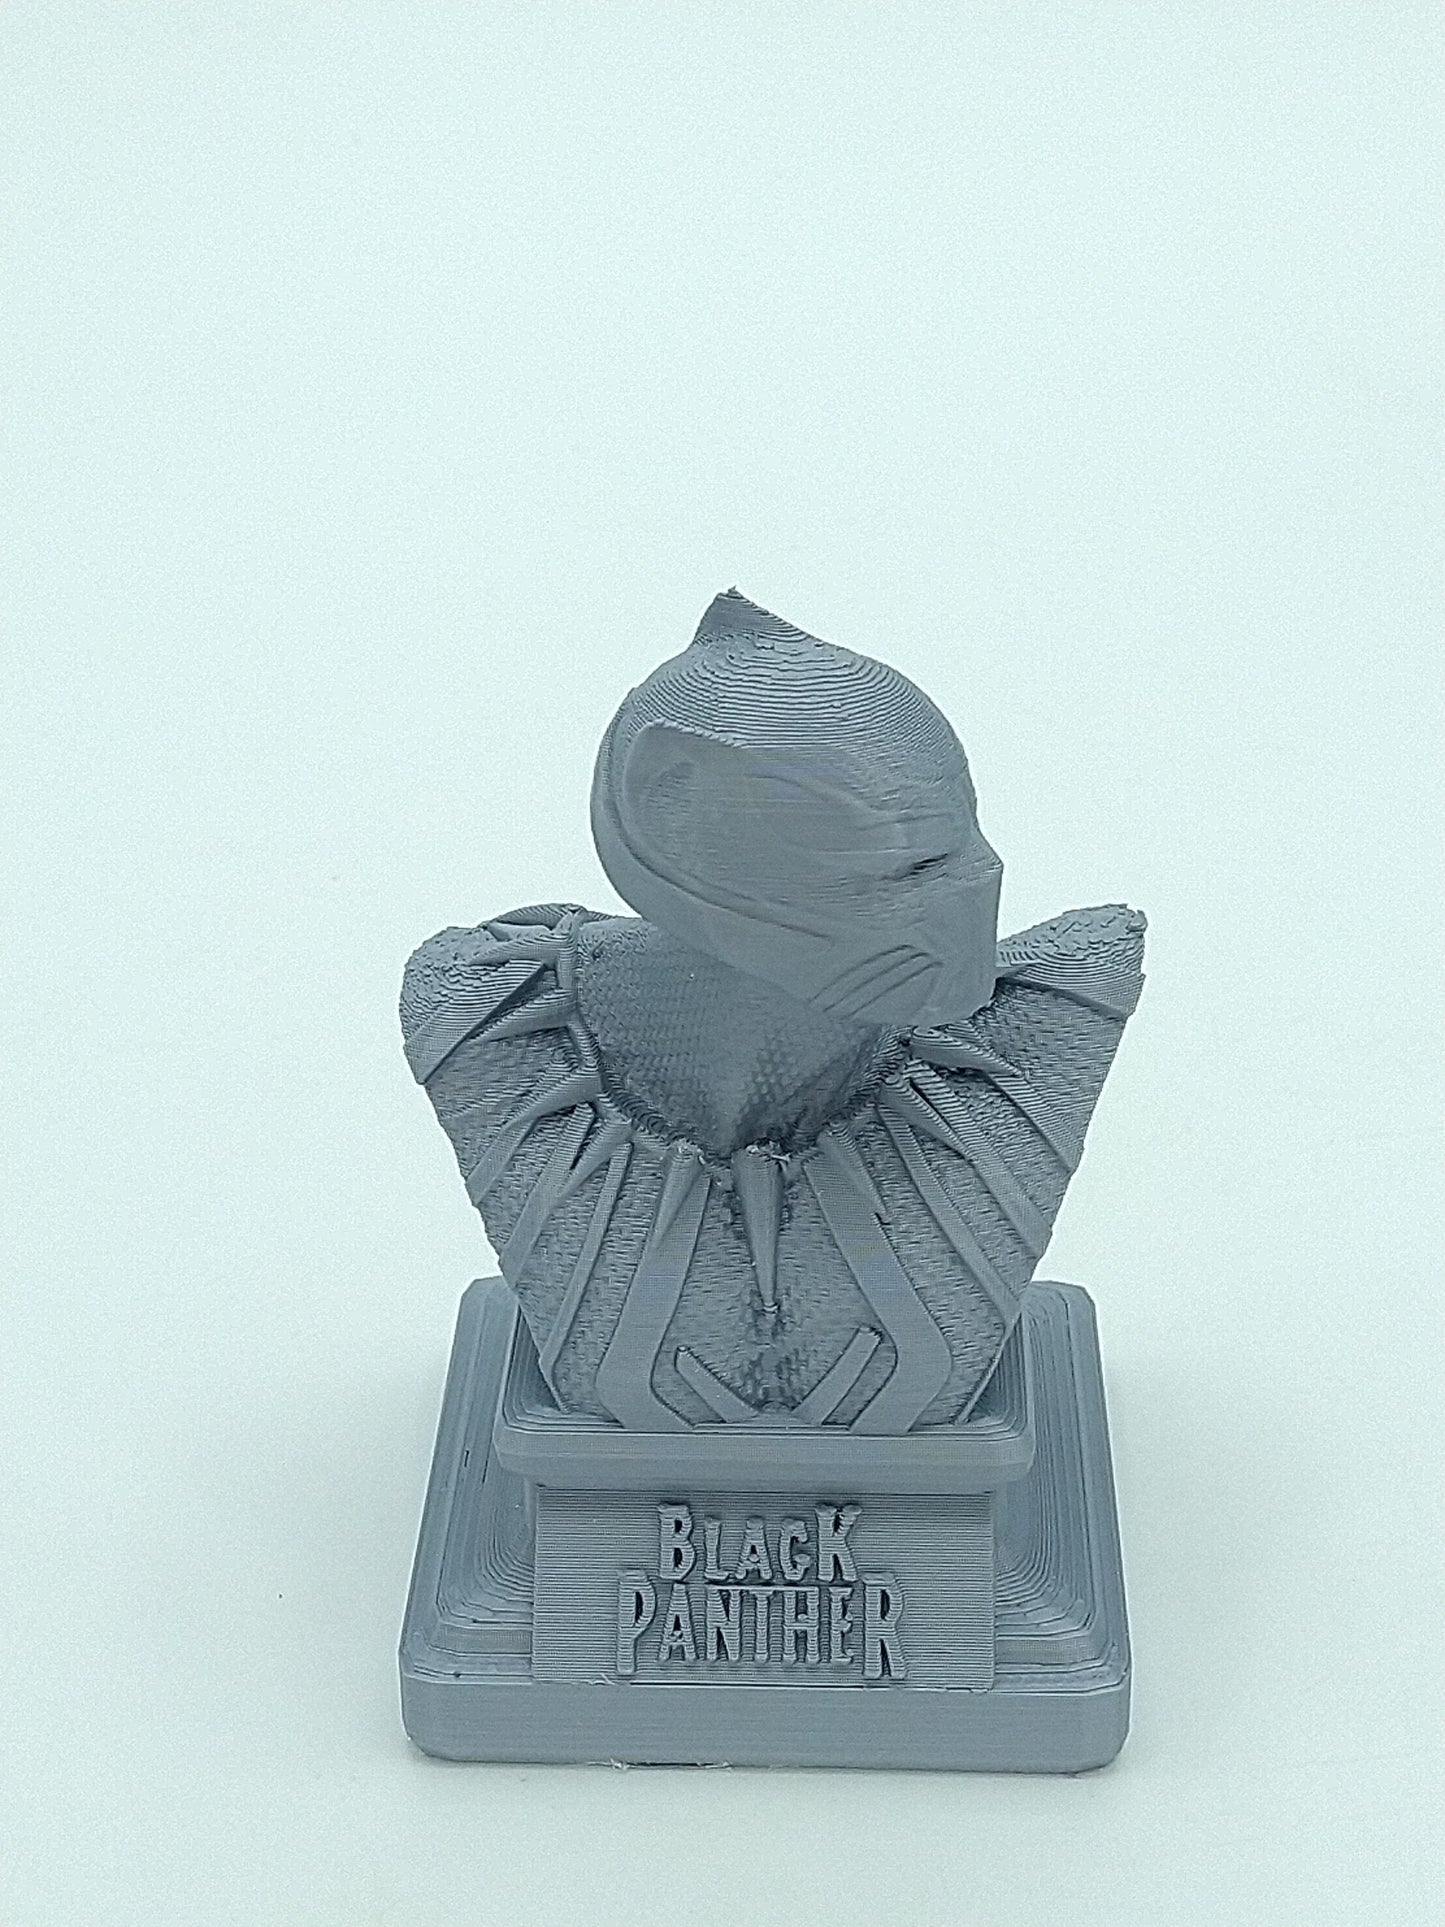 BLACK PANTHER Bust Statue Figure 3.5" 3D Printed